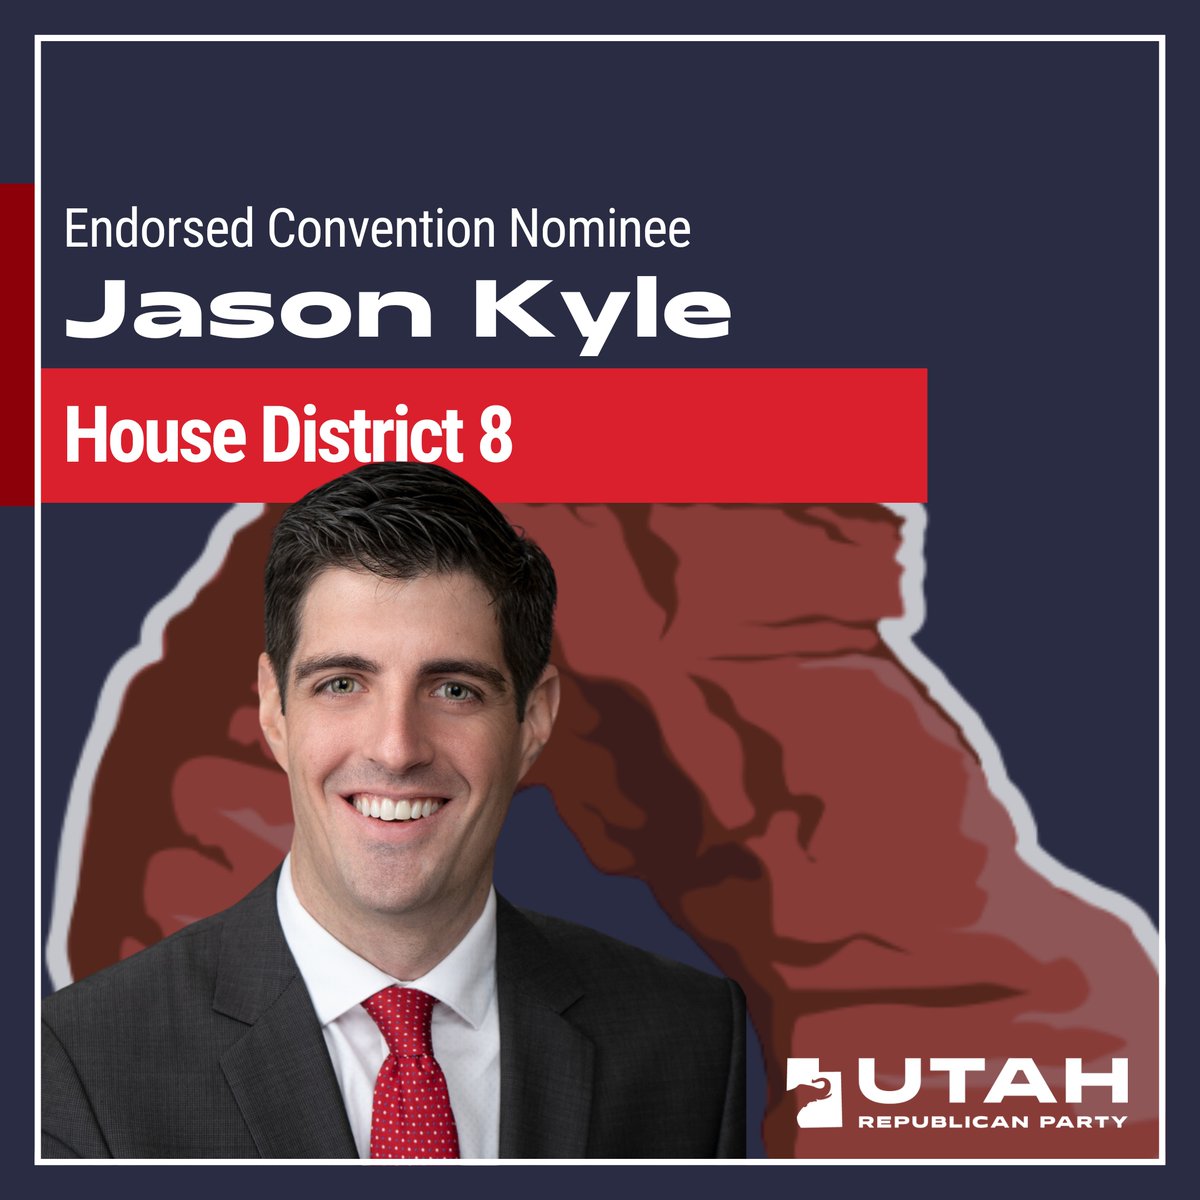 Jason Kyle is the UT GOP's Endorsed Convention Nominee for House District 8! Congratulations Jason!